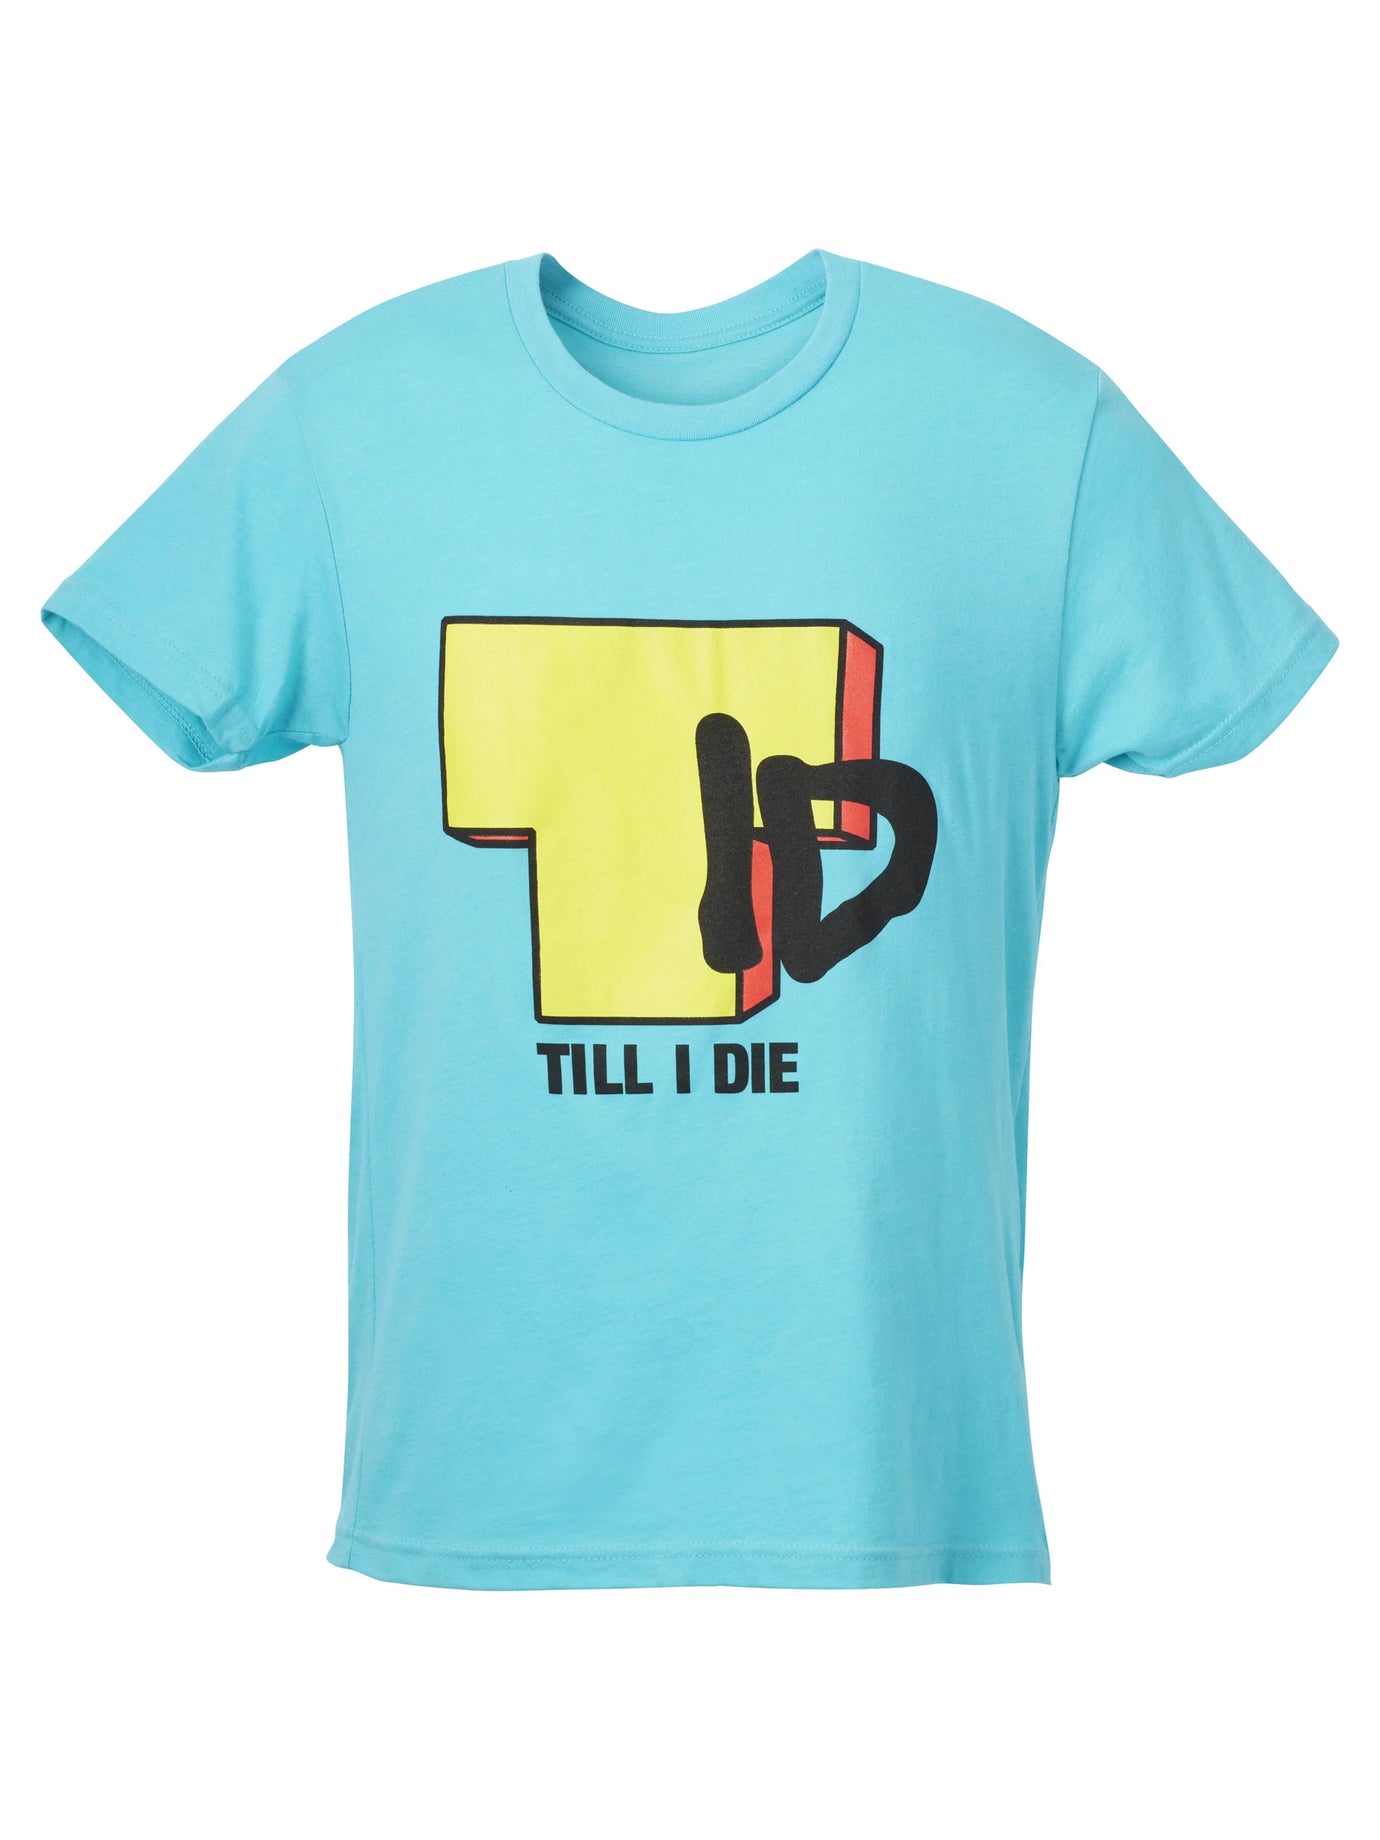 Man standing in a sand colored shirt with Till I Die written on the front